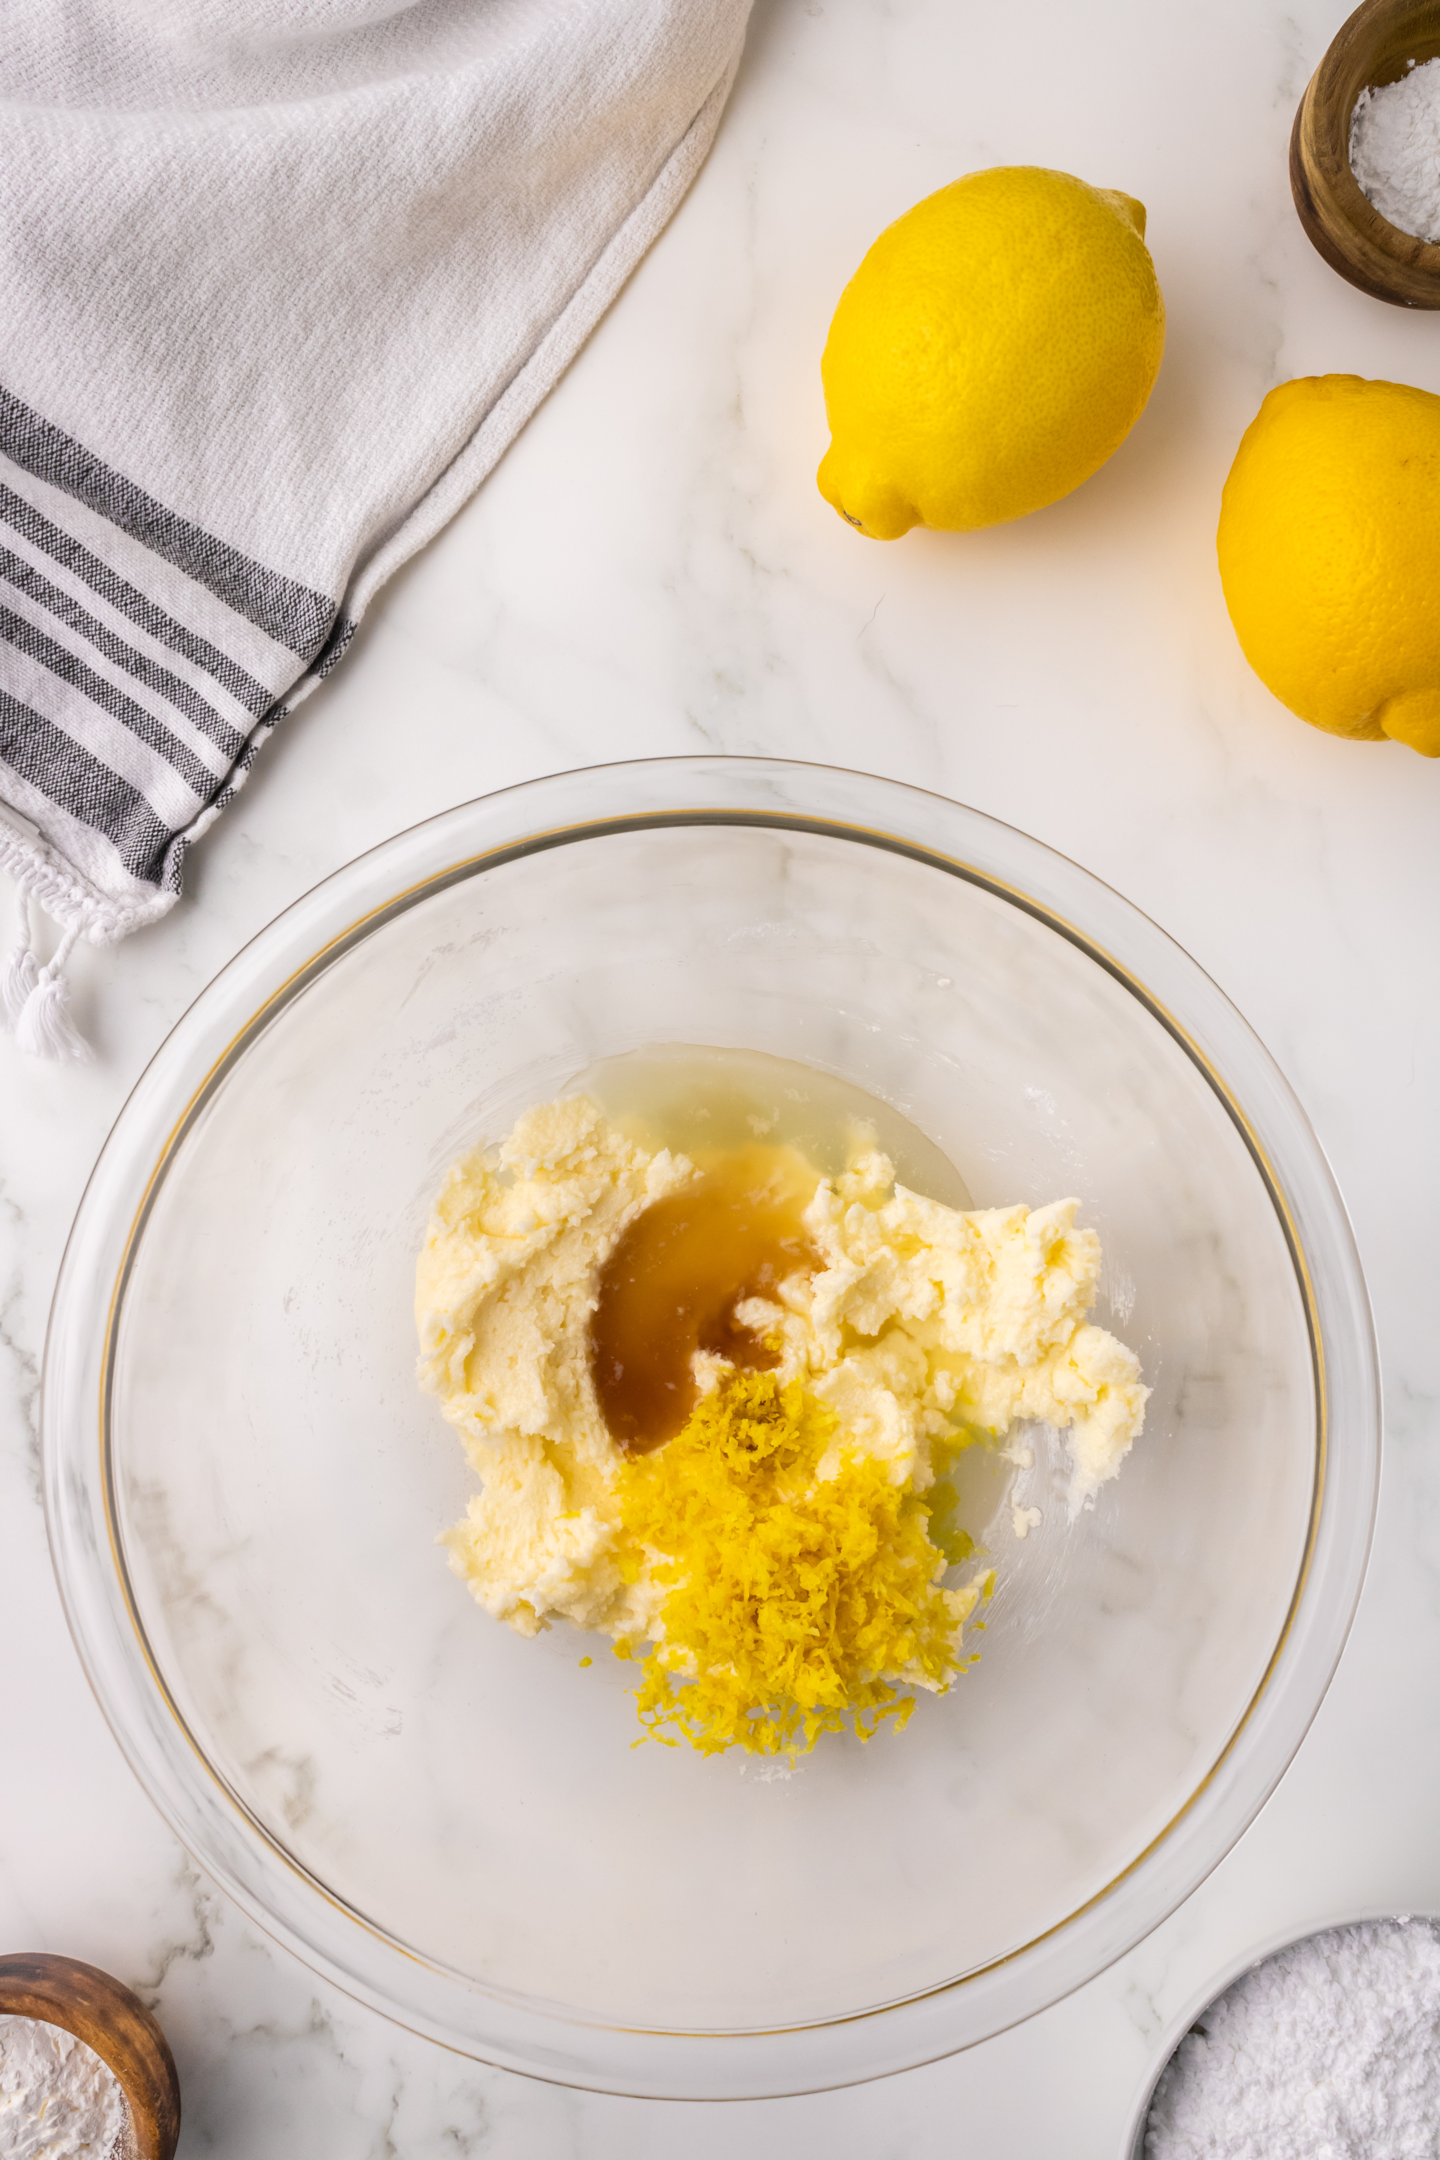 lemon zest, lemon juice, vanilla extract, and lemon extract added to bowl of sugar and butter